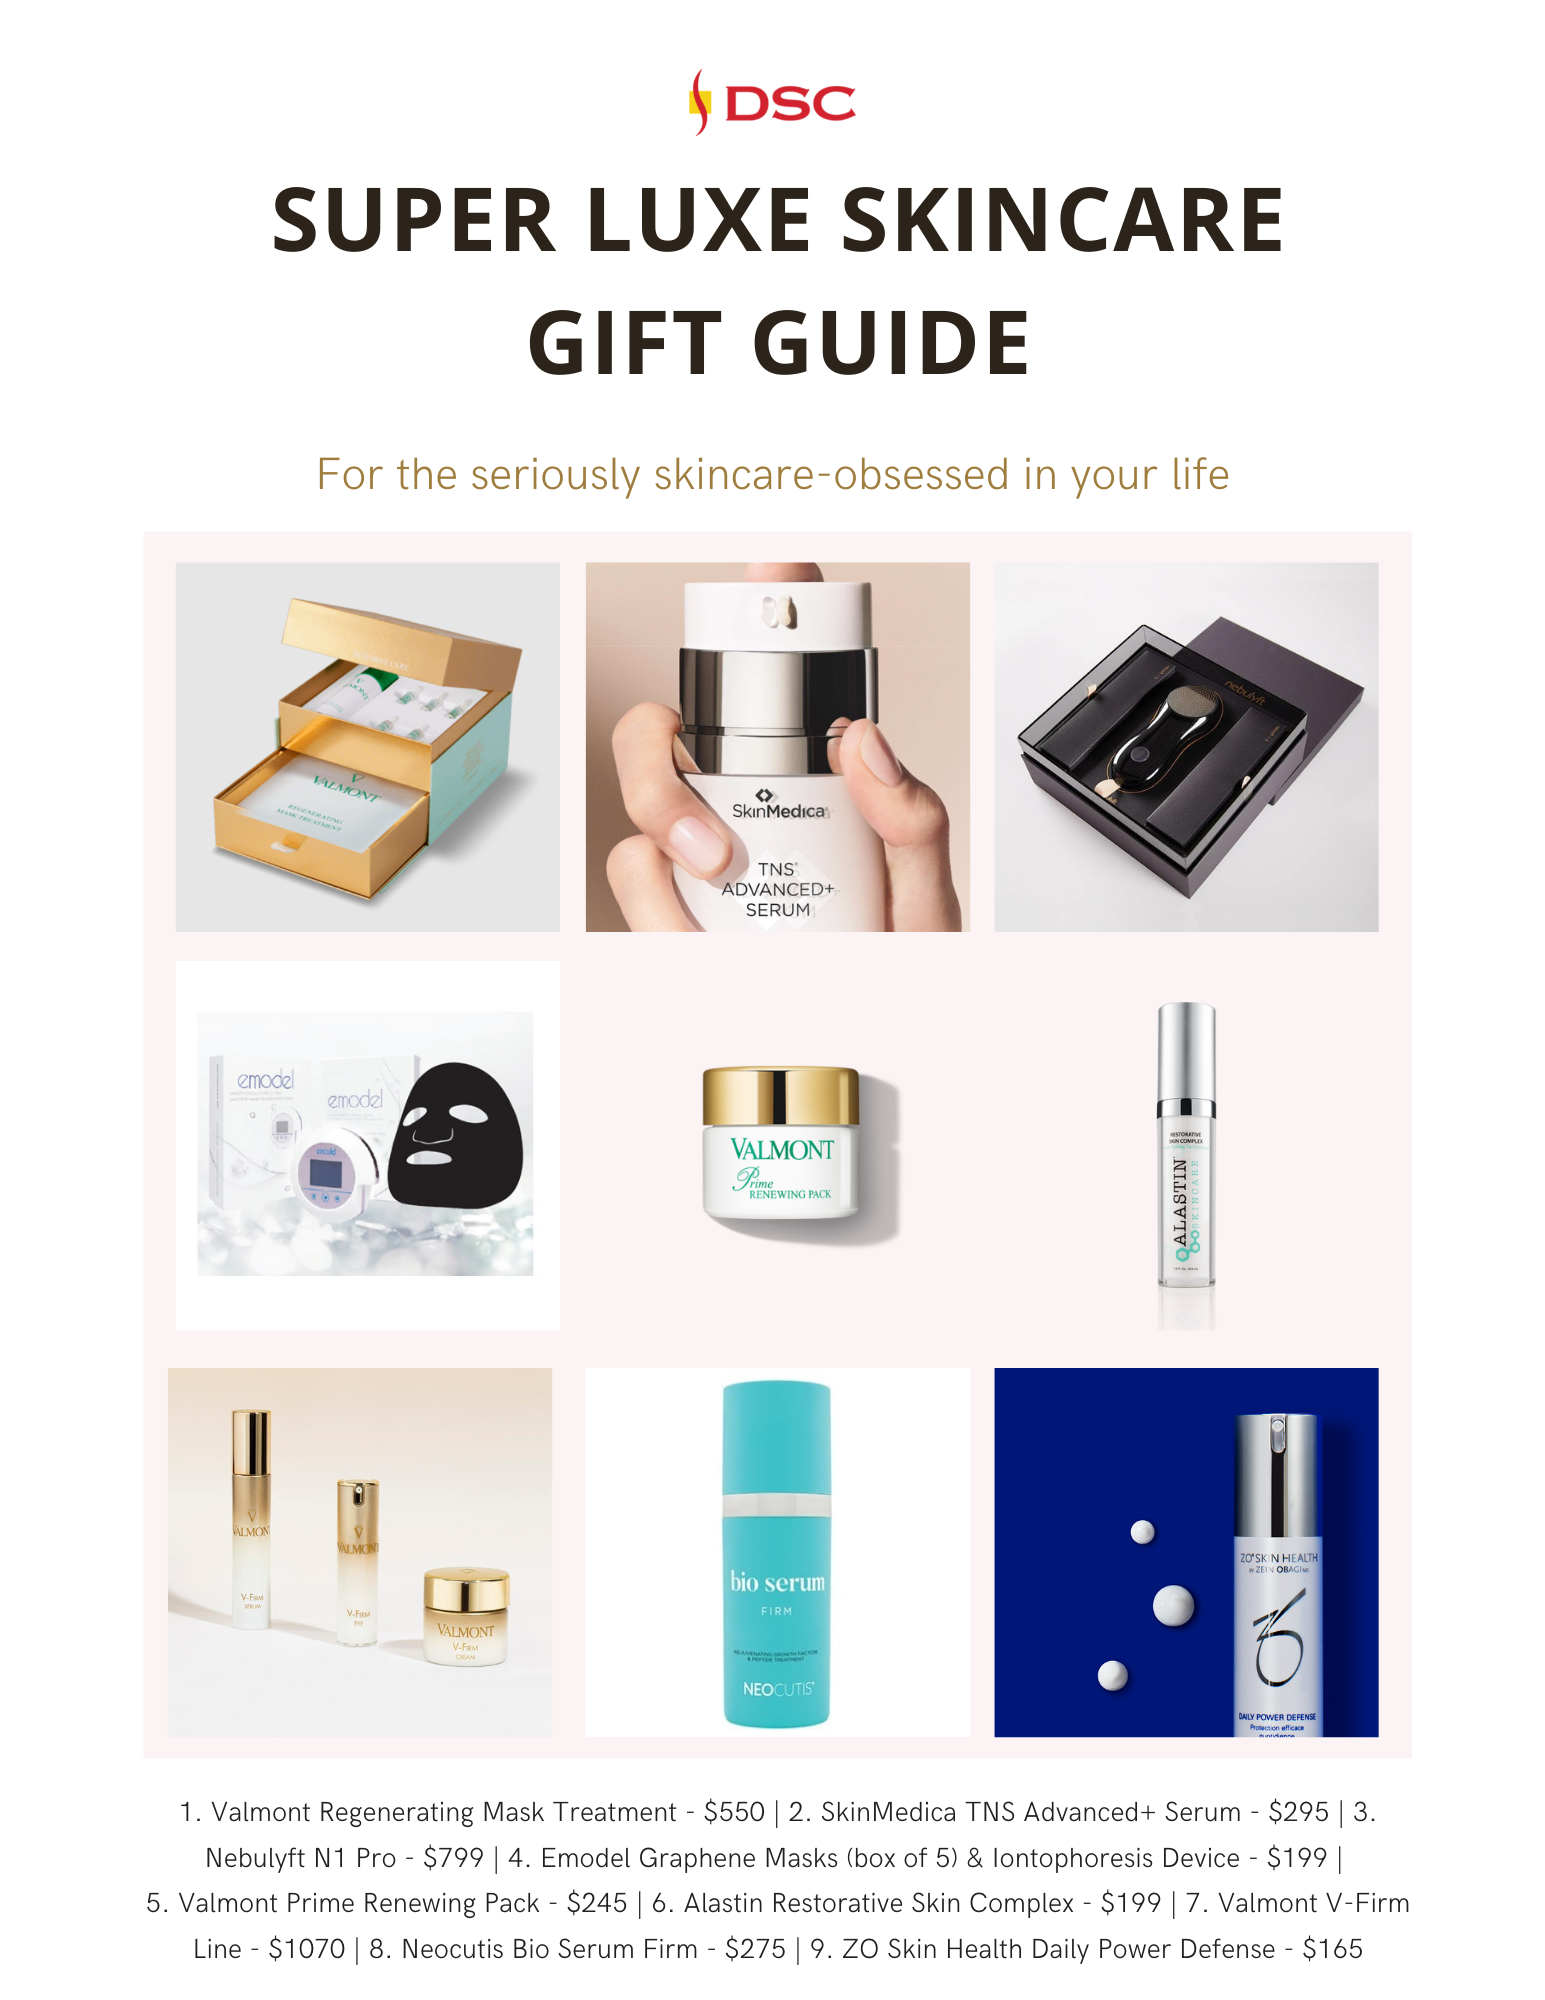 DSC 2022 holiday gift guide for luxury skincare graphic featuring 3x3 grid of 9 luxury skincare product picks with the text "for the seriously skincare-obsessed in your life" at the top and the text "1. Valmont Regenerating Mask Treatment - $550 | 2. SkinMedica TNS Advanced+ Serum - $295 | 3. Nebulyft N1 Pro - $799 | 4. Emodel Graphene Masks (box of 5) & Iontophoresis Device - $199 | 5. Valmont Prime Renewing Pack - $245 | 6. Alastin Restorative Skin Complex - $199 | 7. Valmont V-Firm Line - $1070 | 8. Neocutis Bio Serum Firm - $275 | 9. ZO Skin Health Daily Power Defense - $165" at the bottom